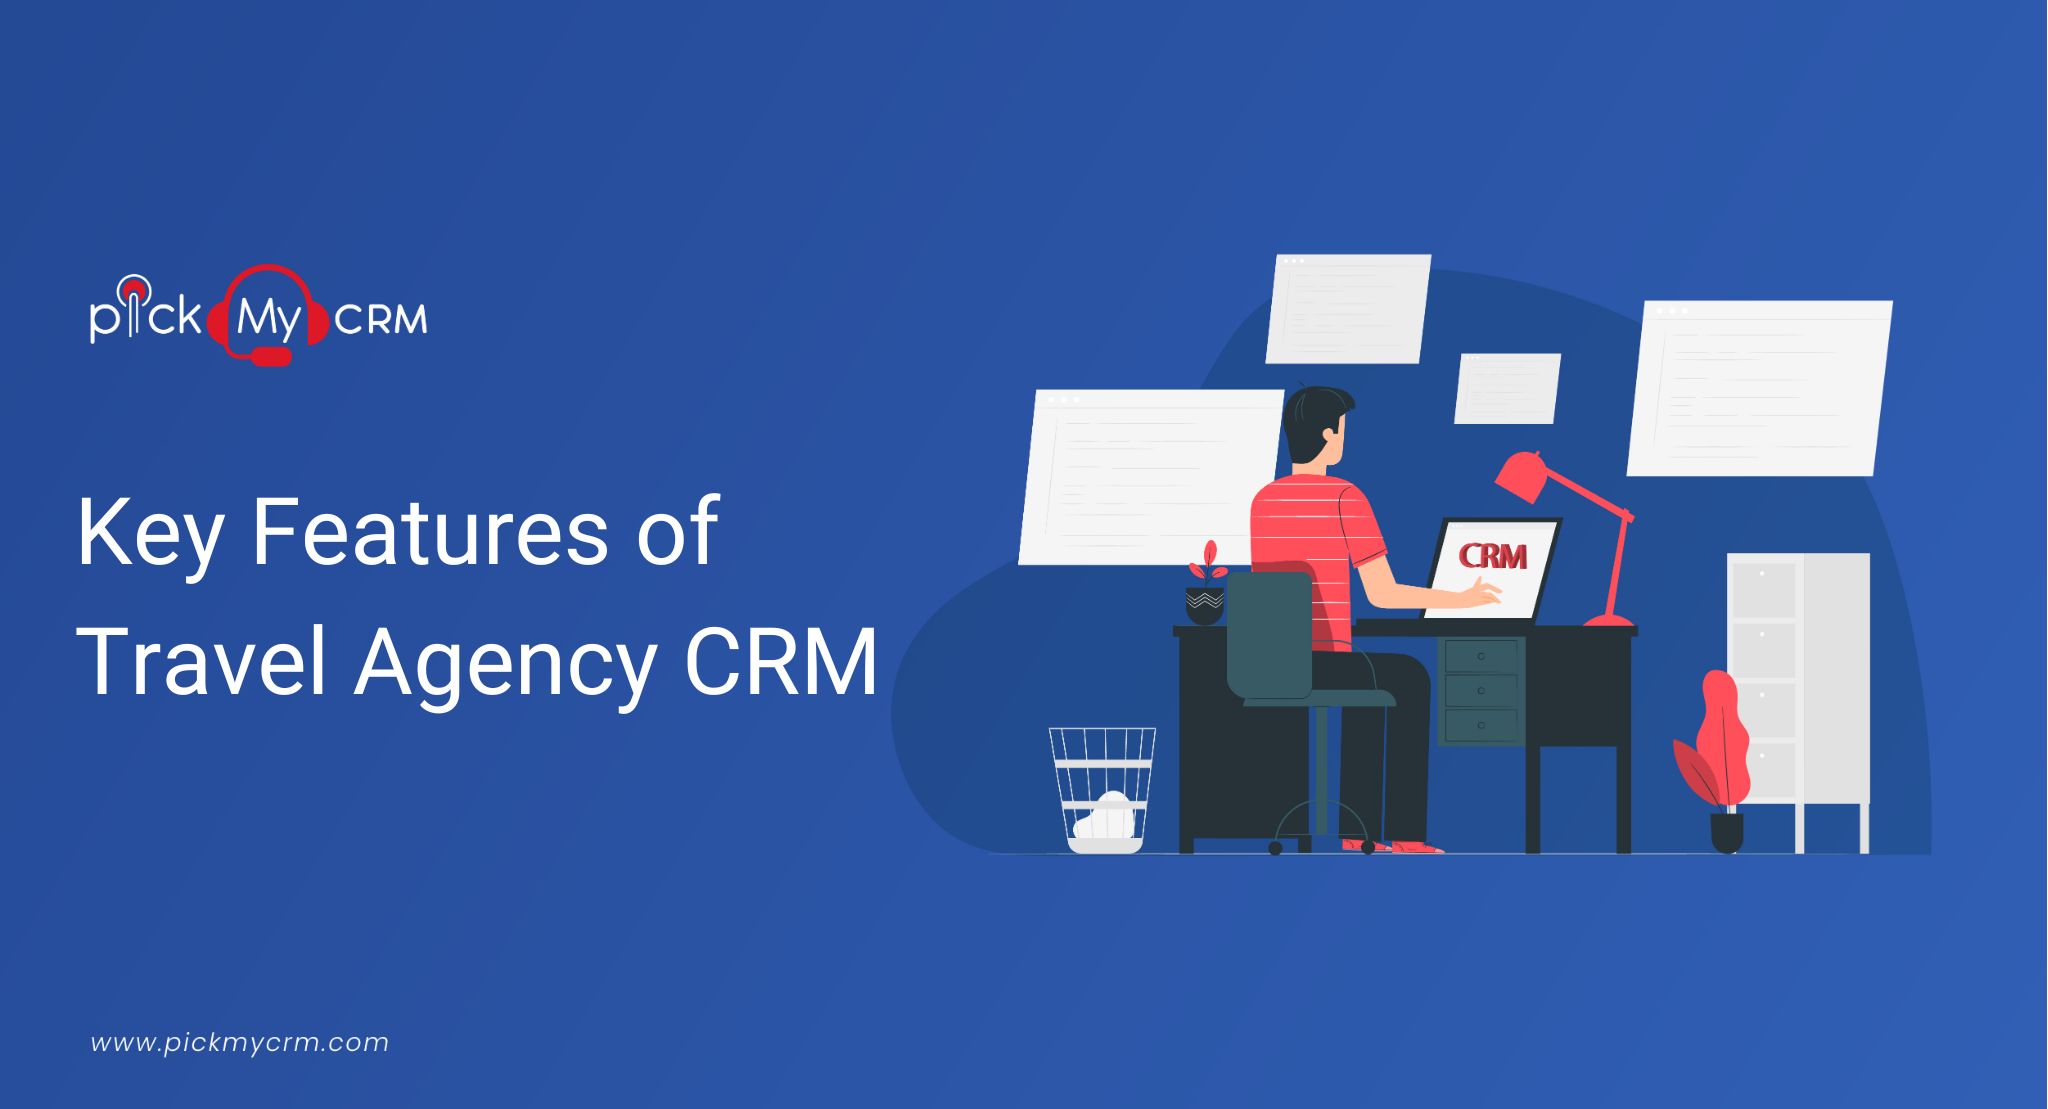 Key Features of Travel Agency CRM